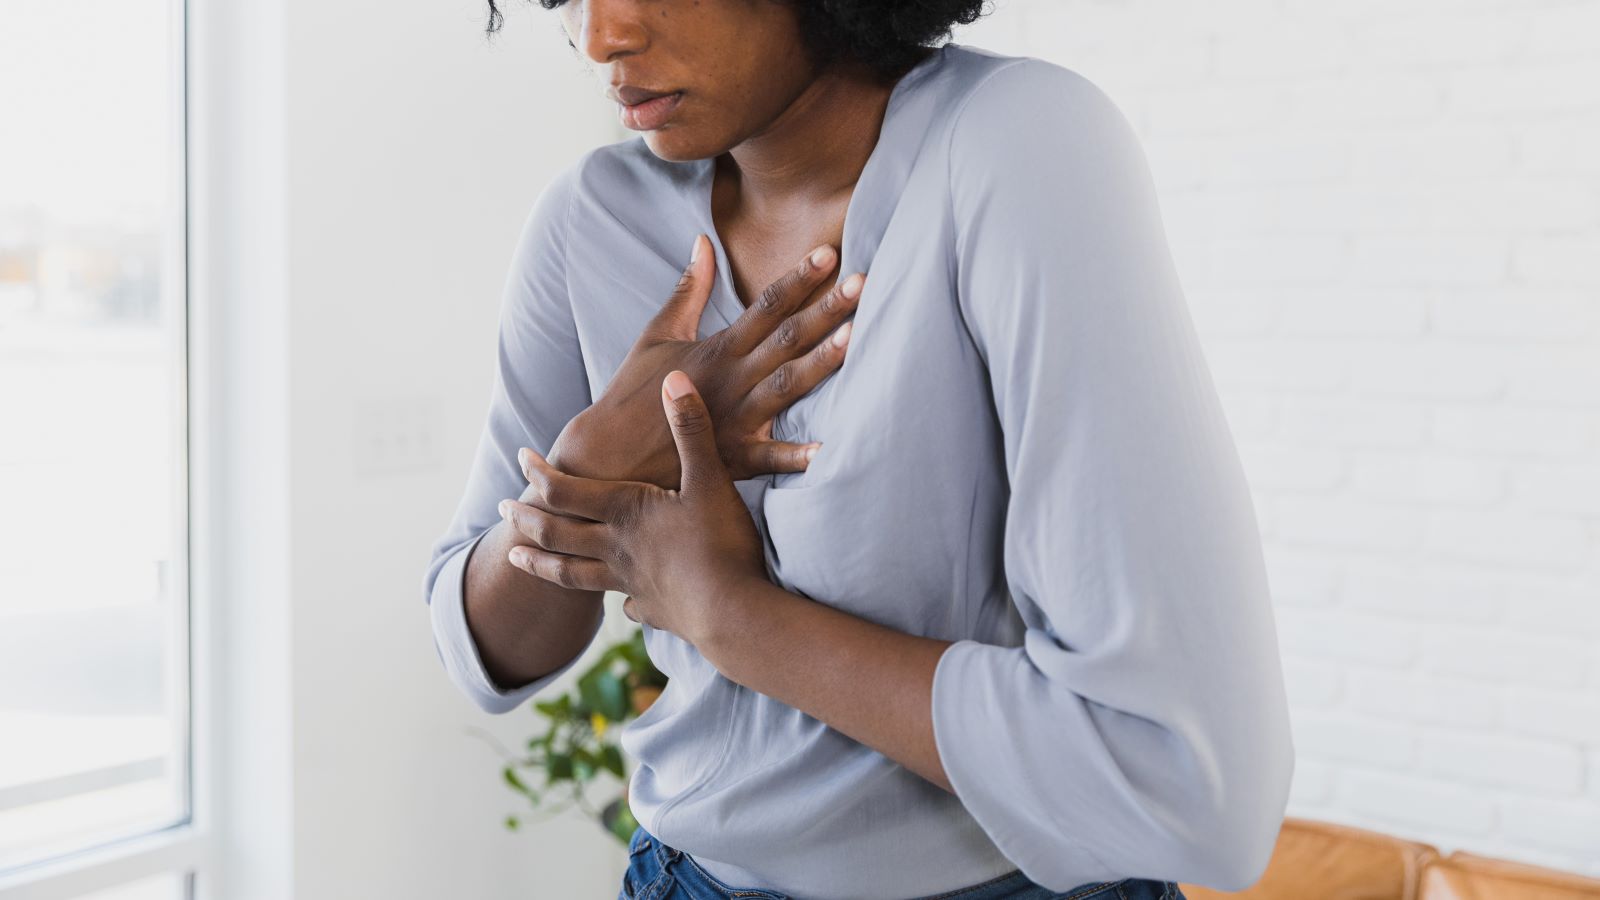 7 Causes of Heartburn That Aren’t Food-Related